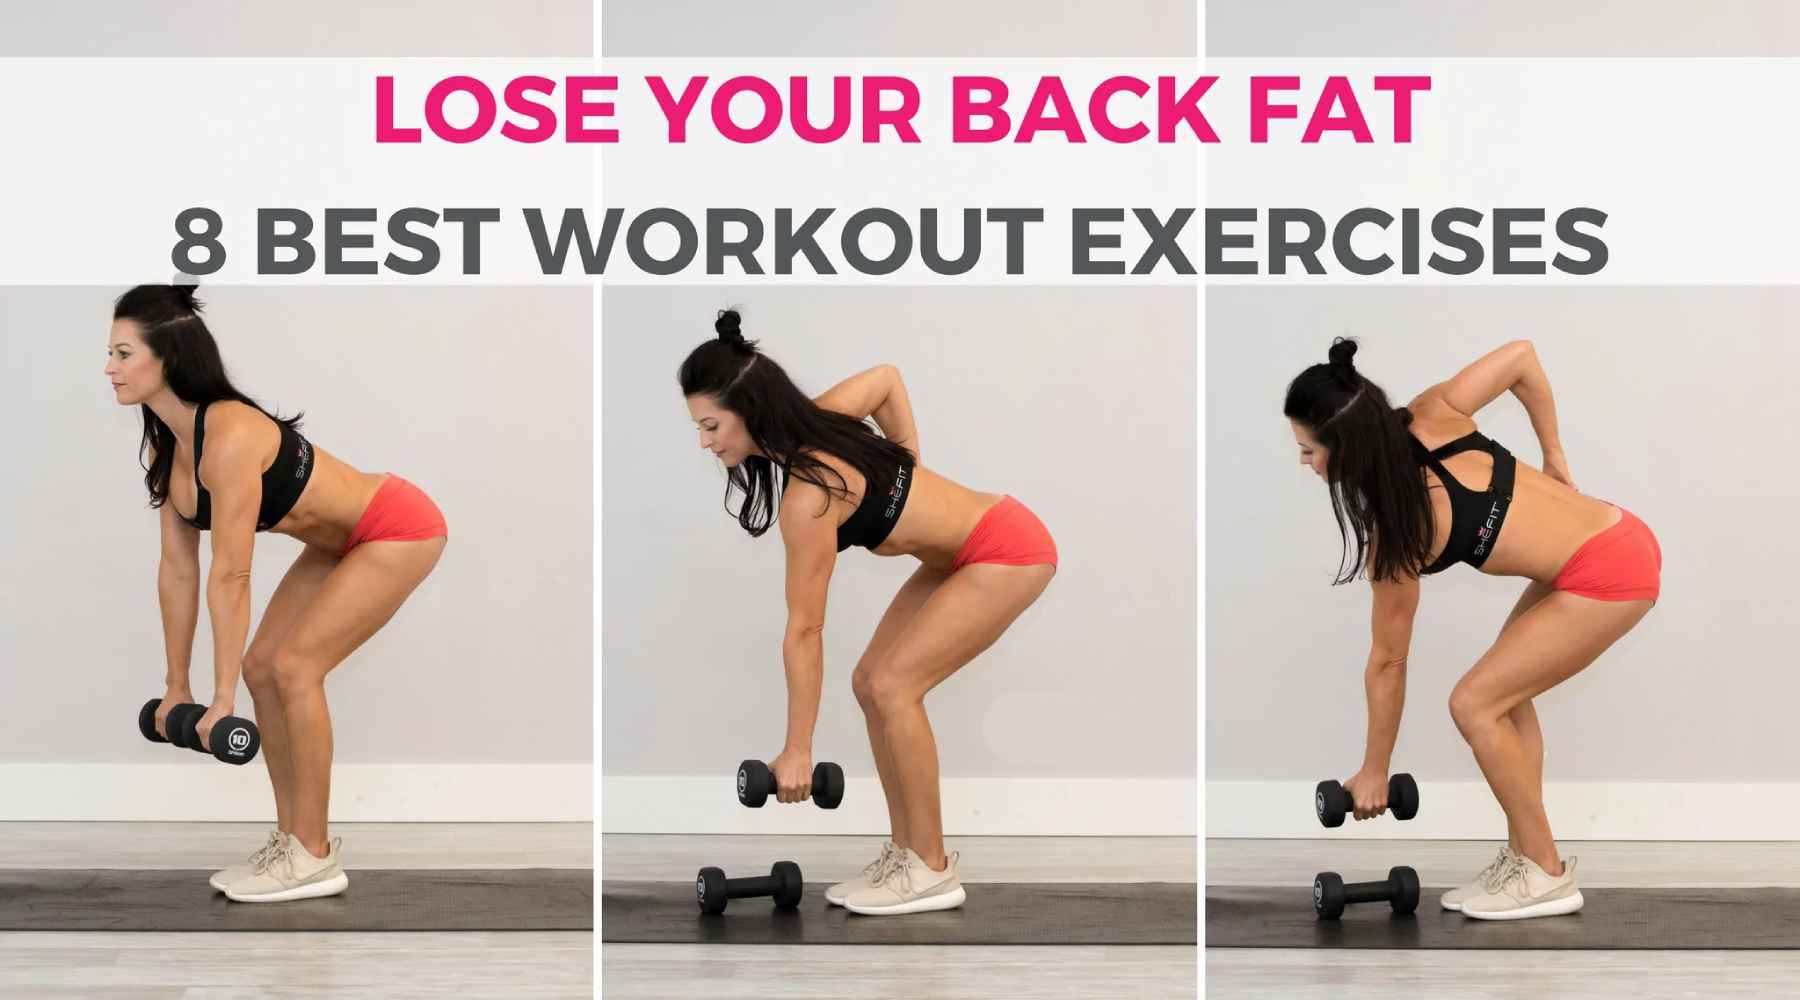 17 Back Exercises Every Woman Should Add To Her Workout ASAP